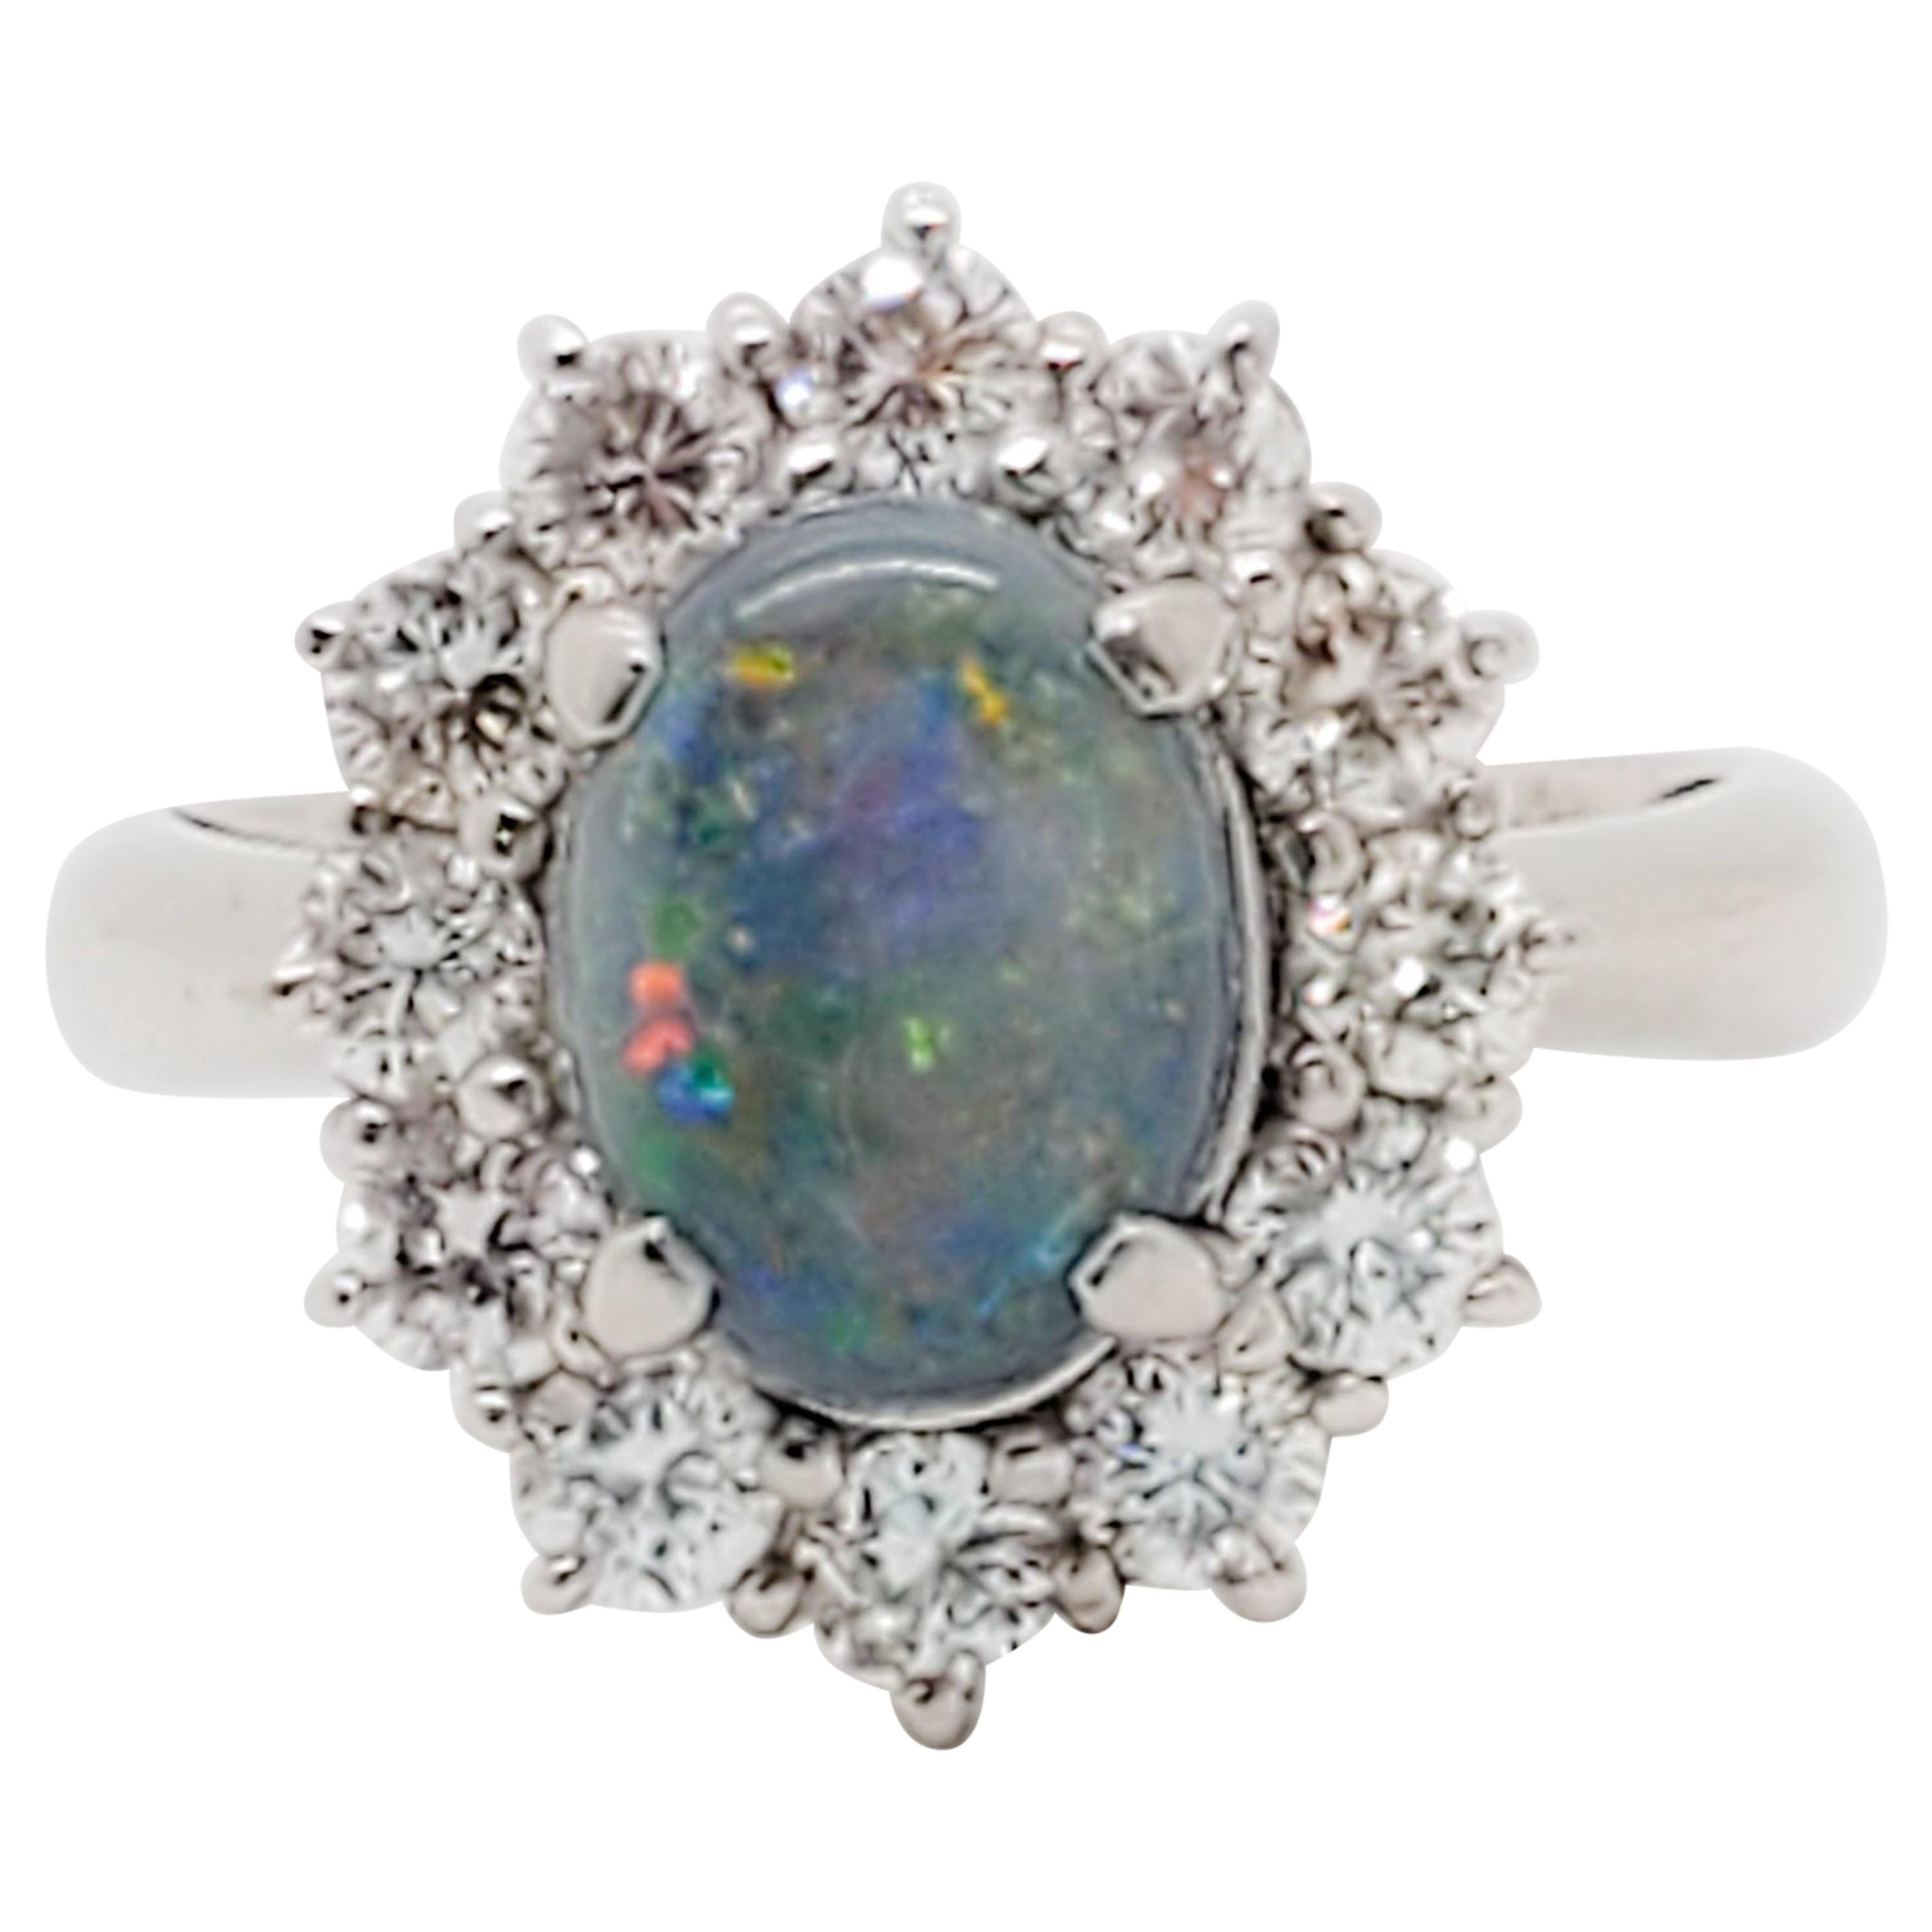 Estate Black Opal Oval and White Diamond Cocktail Ring in Platinum